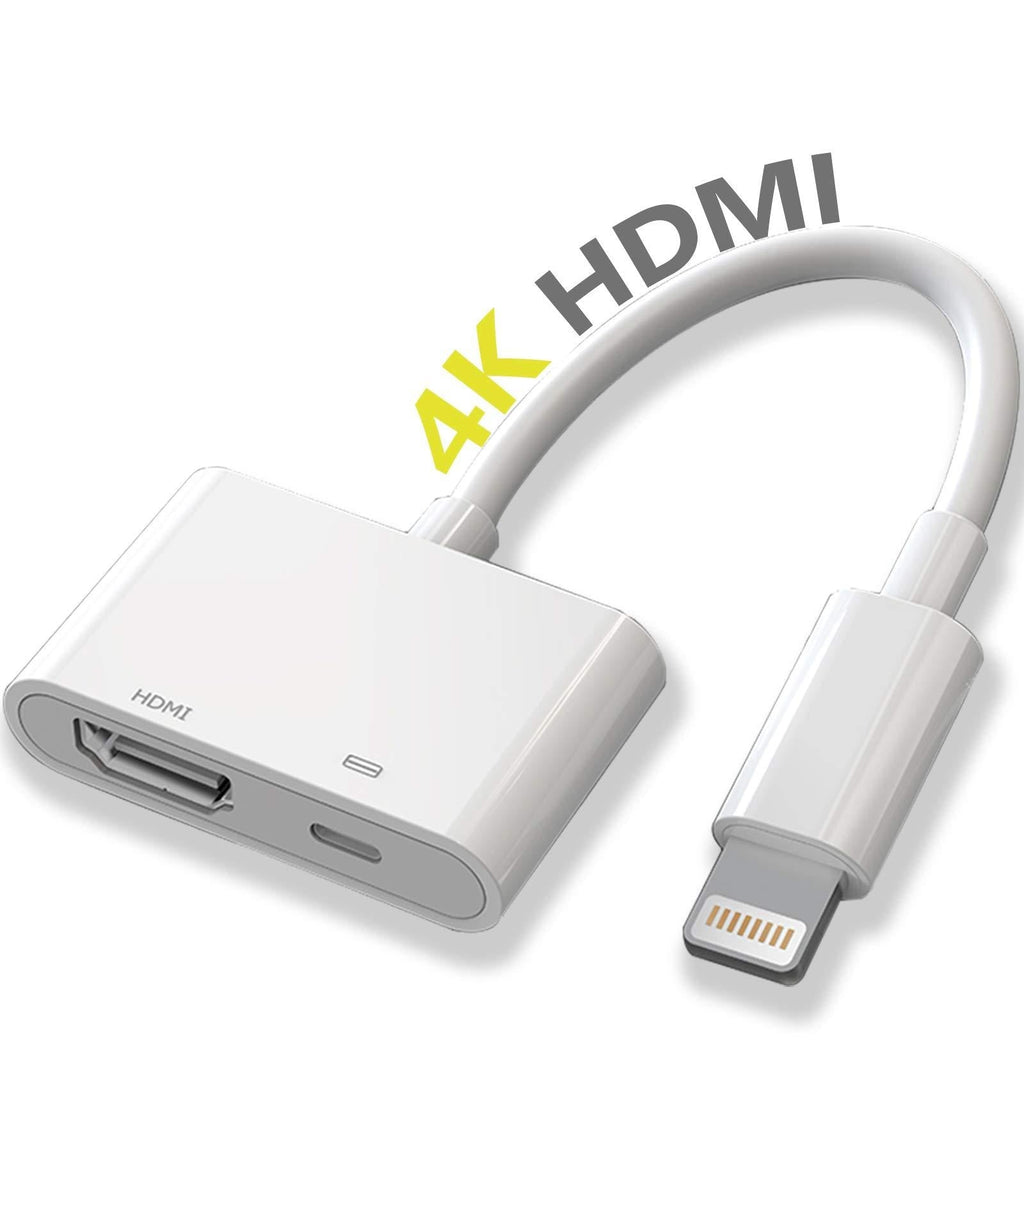 Apple Lightning to HDMI Digital AV Adapter, [Apple MFi Certified] 1080P Video & Audio Sync Screen Converter AV Adapter with Charging Port for iPhone HDMI Converter to HD TV/Projector/Monitor - White